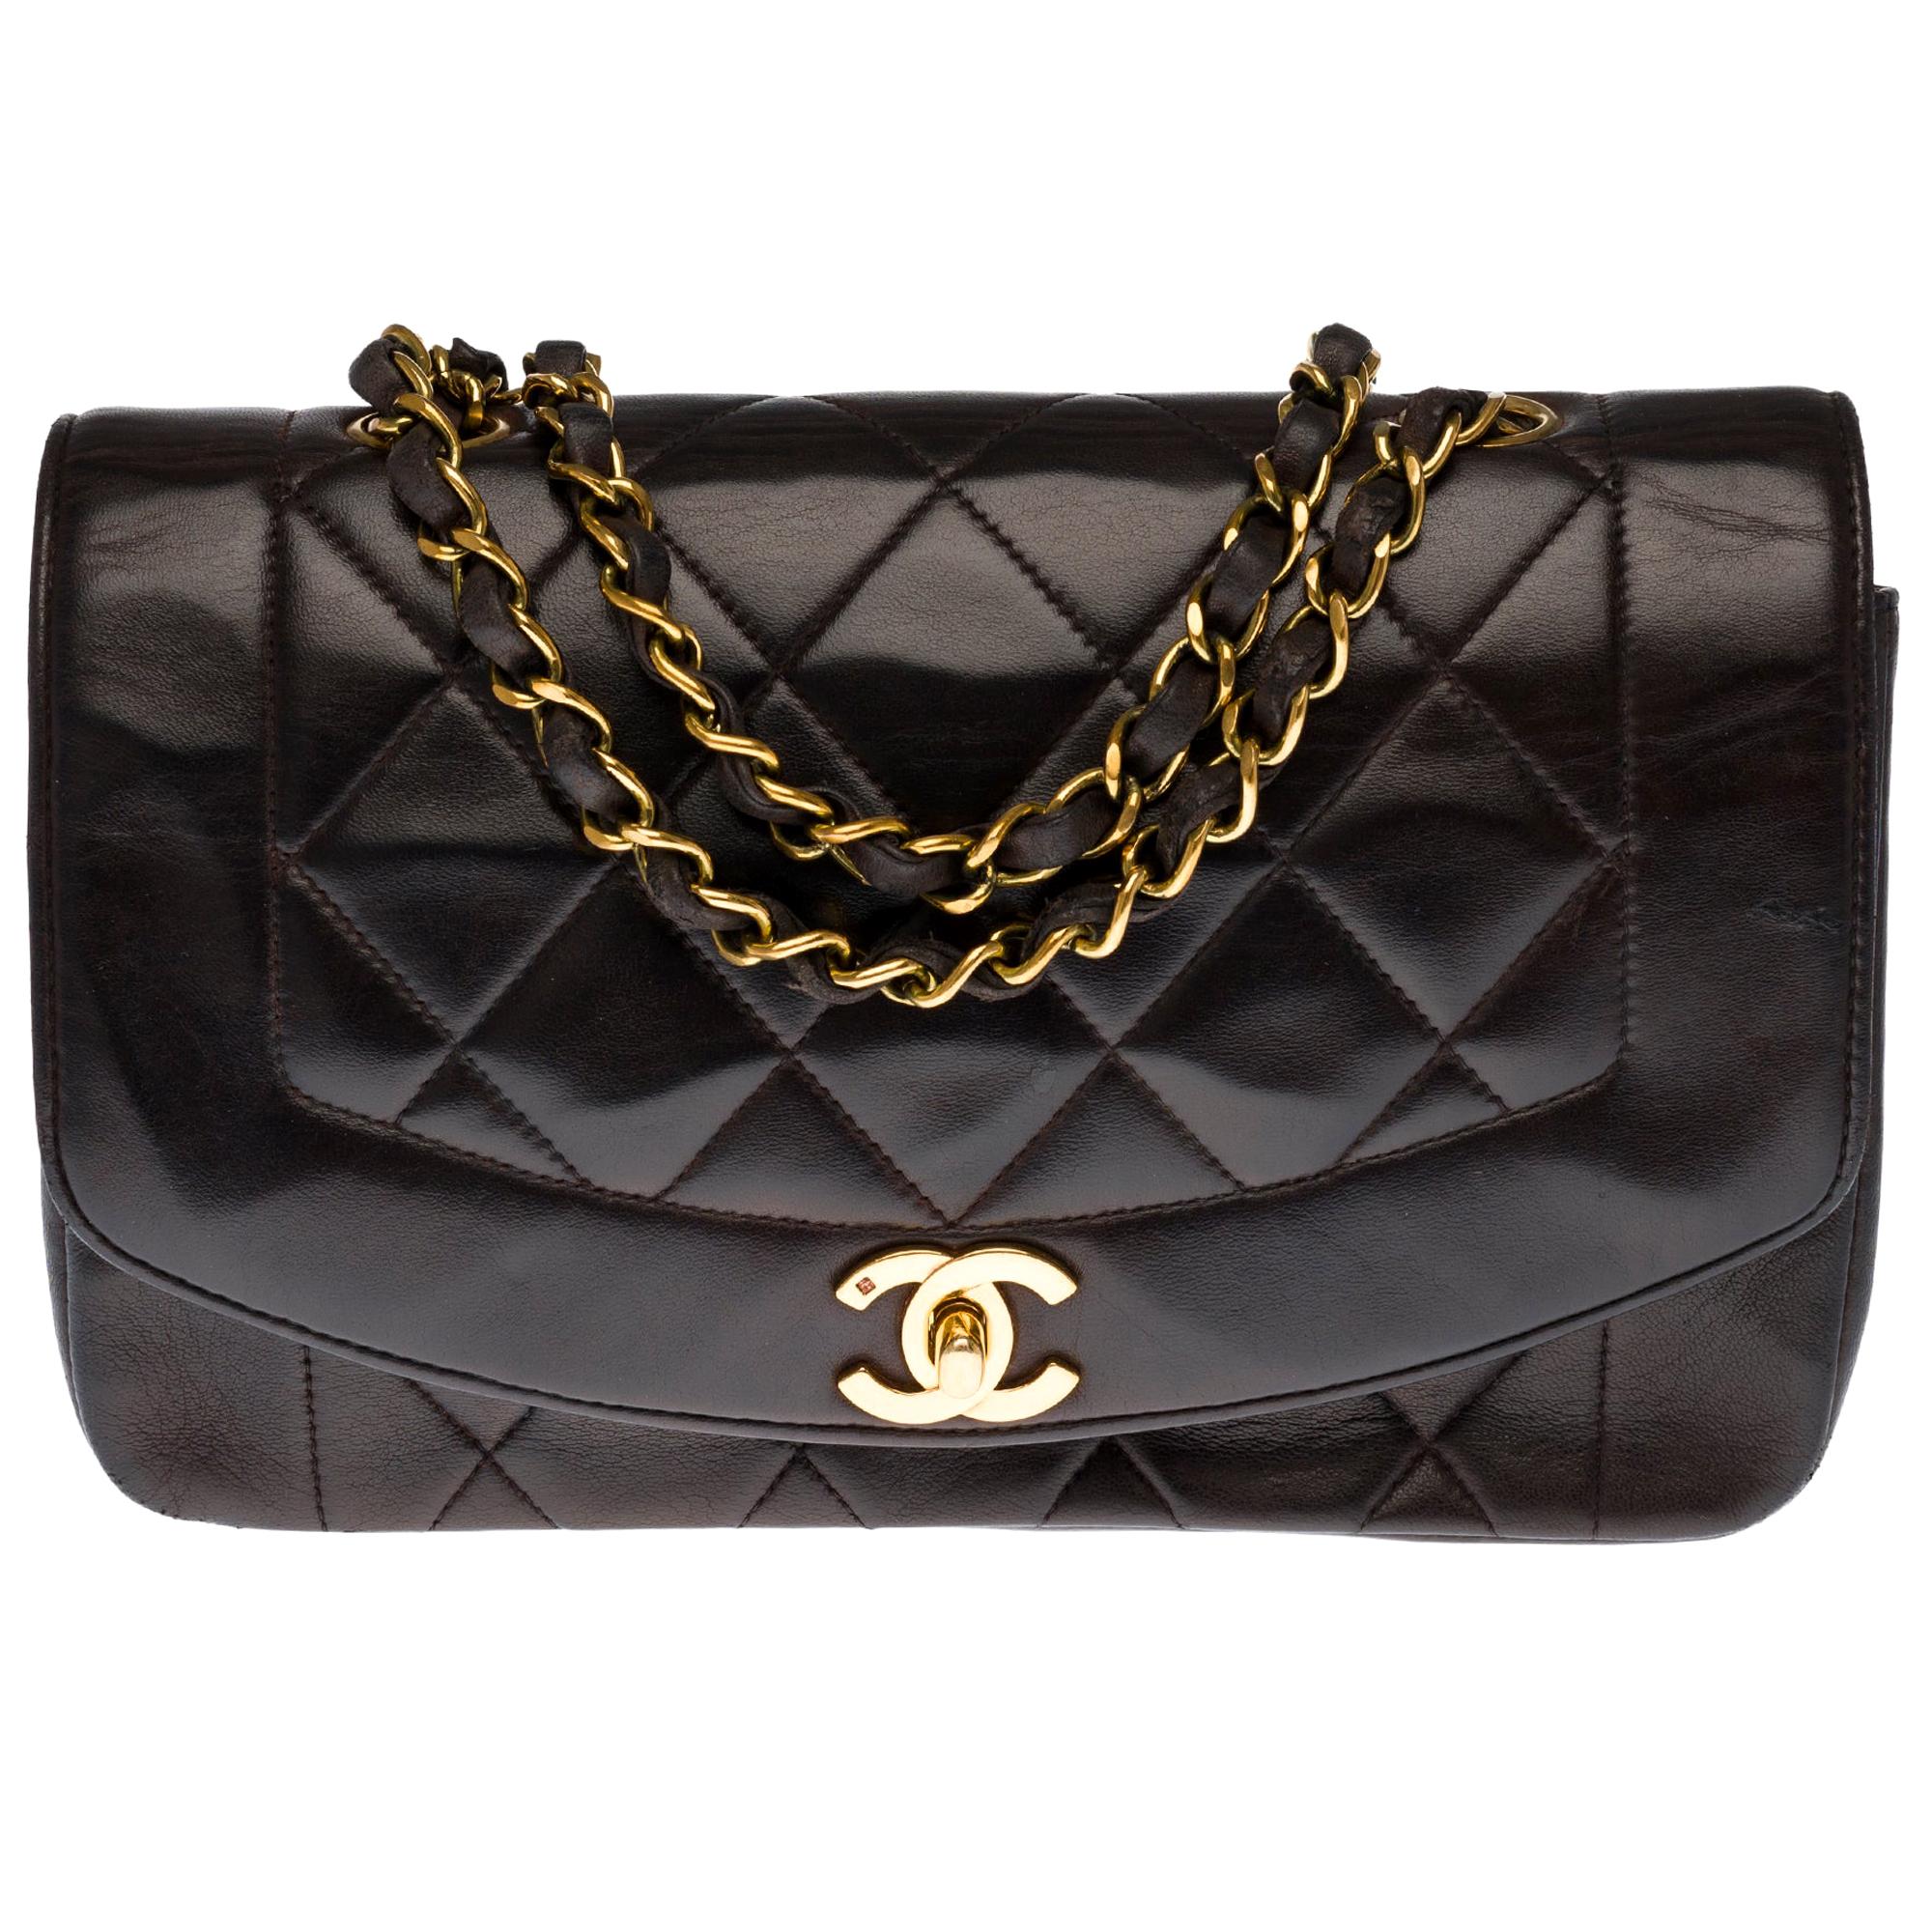 Stunning Chanel Diana Shoulder bag in brown quilted leather with gold hardware